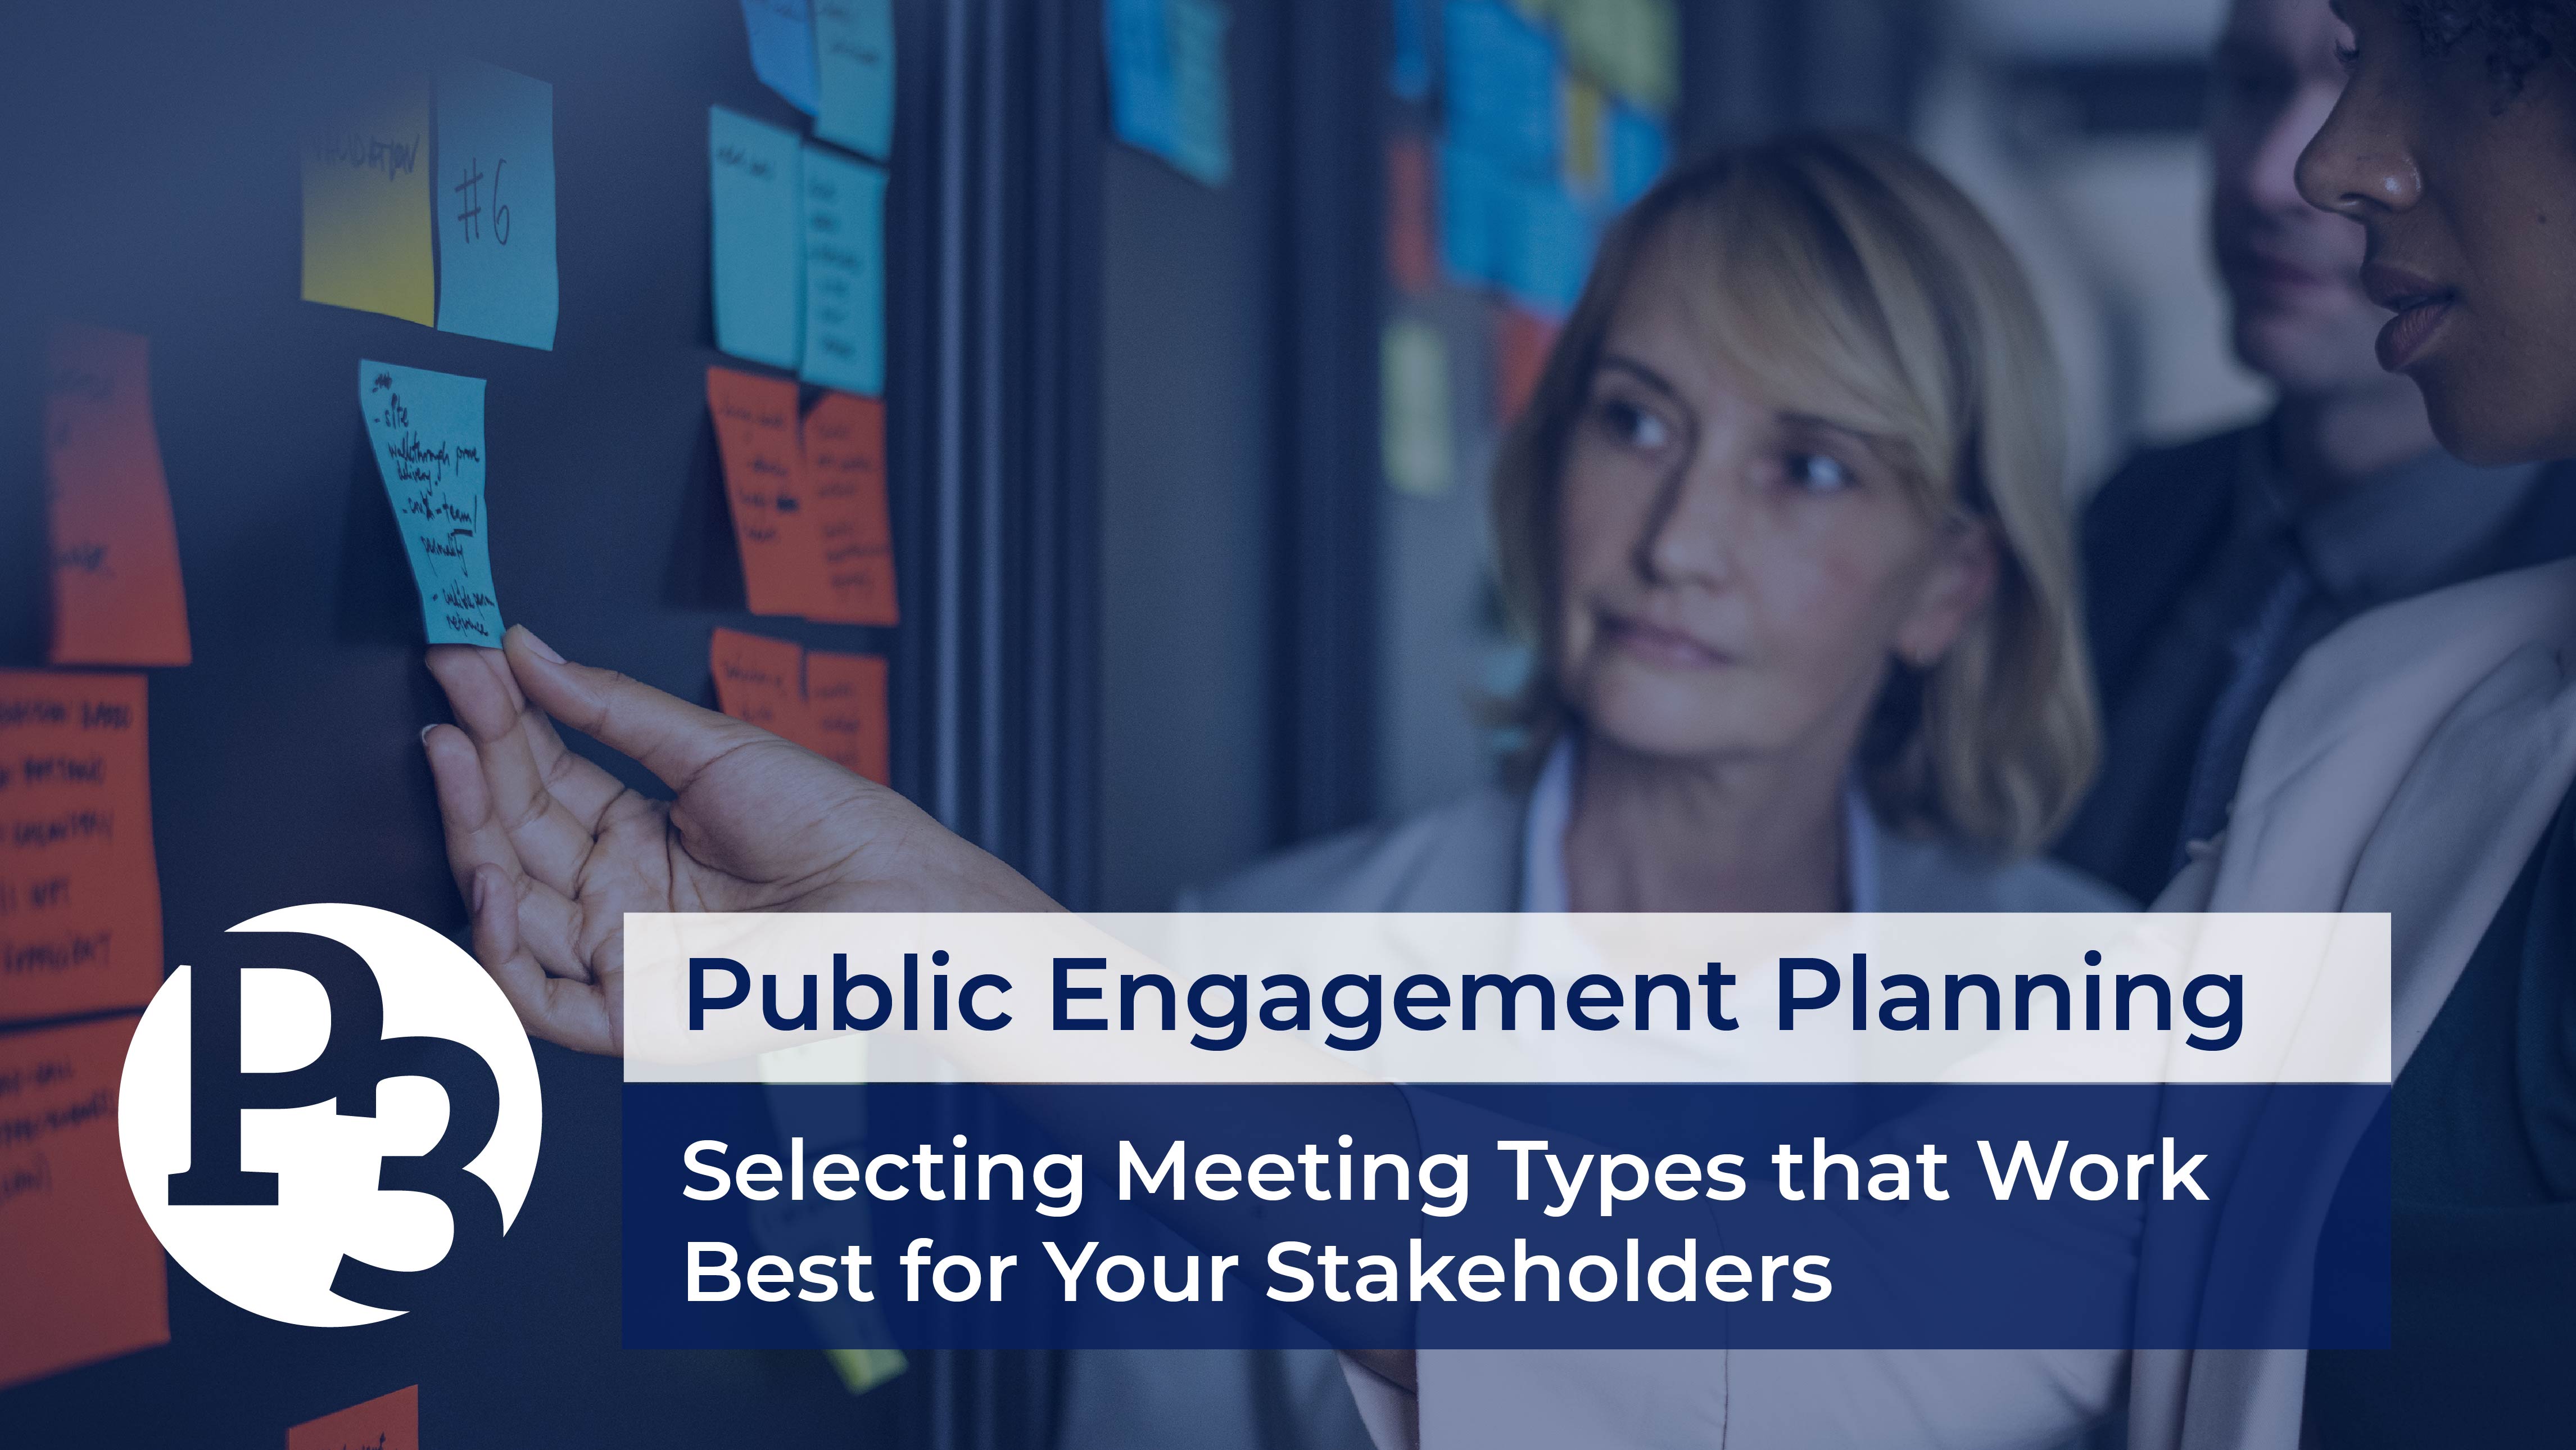 Public Engagement Planning: Selecting Meeting Types that Work Best for Your Stakeholders